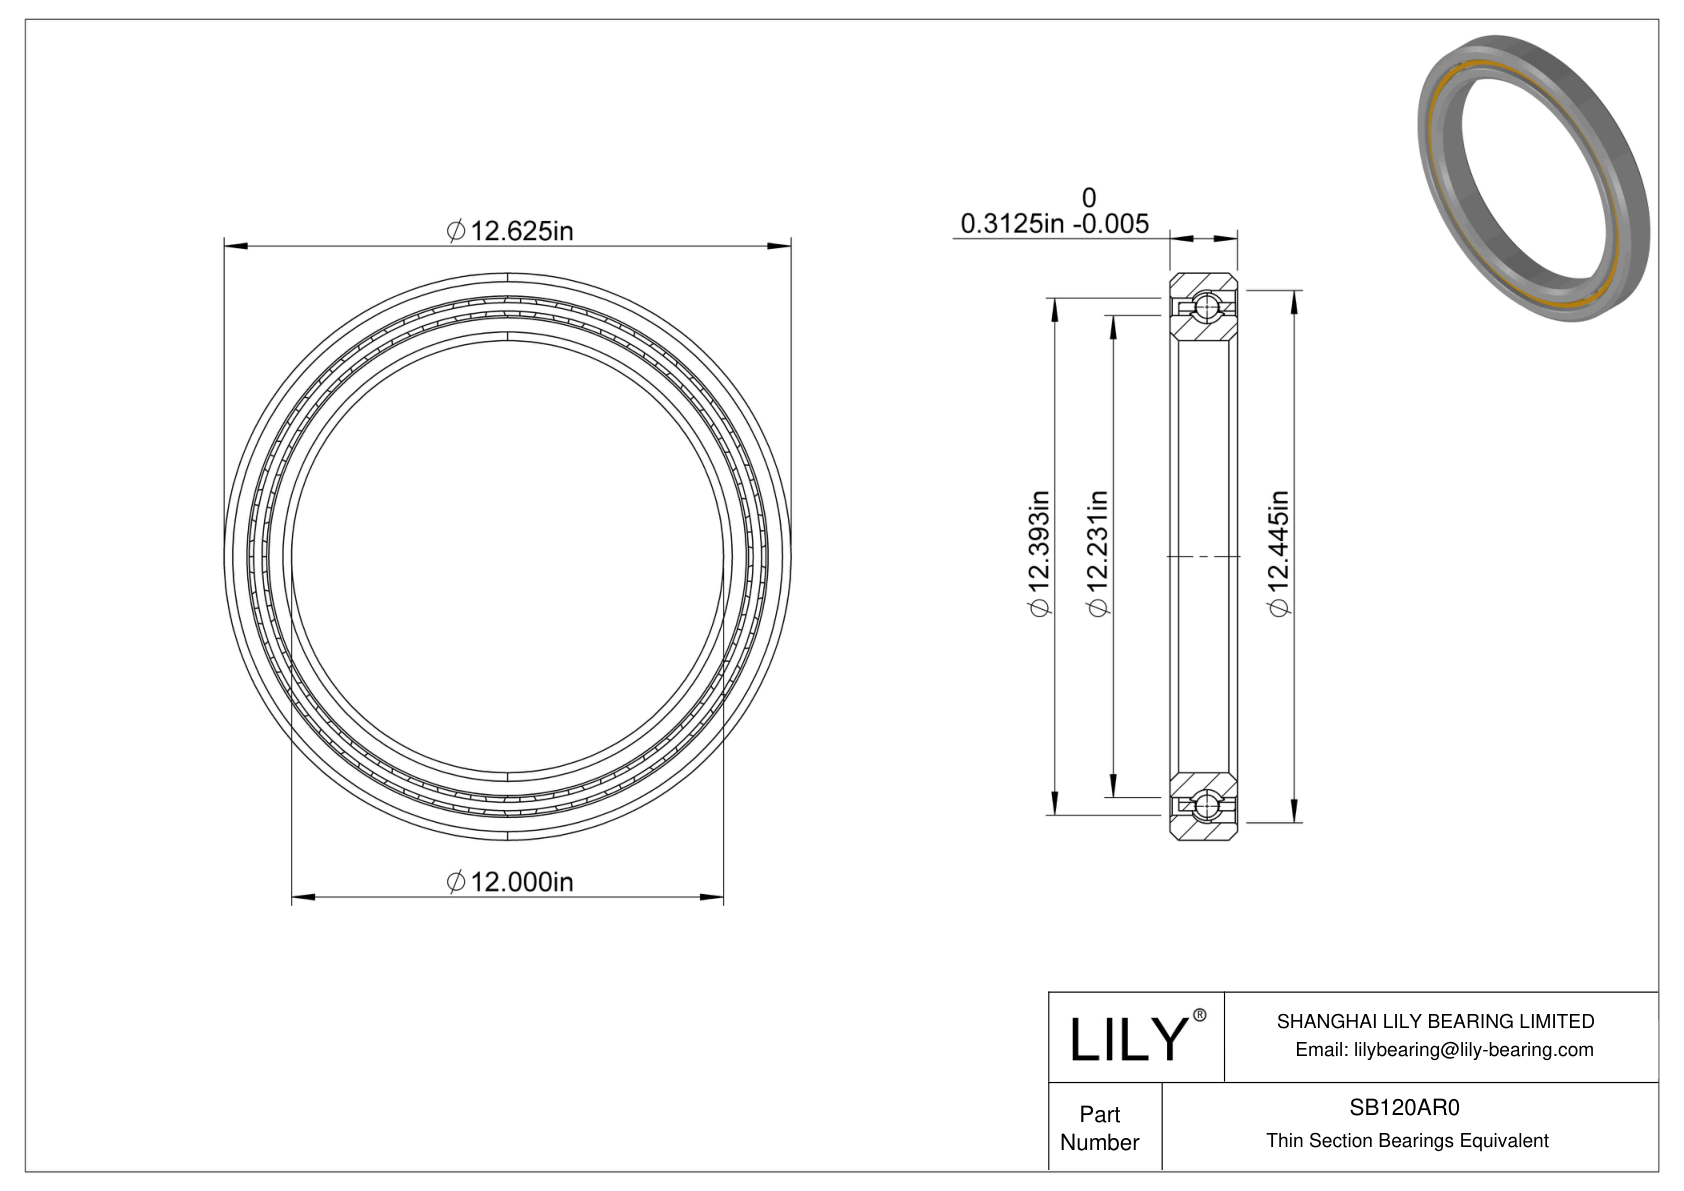 SB120AR0 Constant Section (CS) Bearings cad drawing